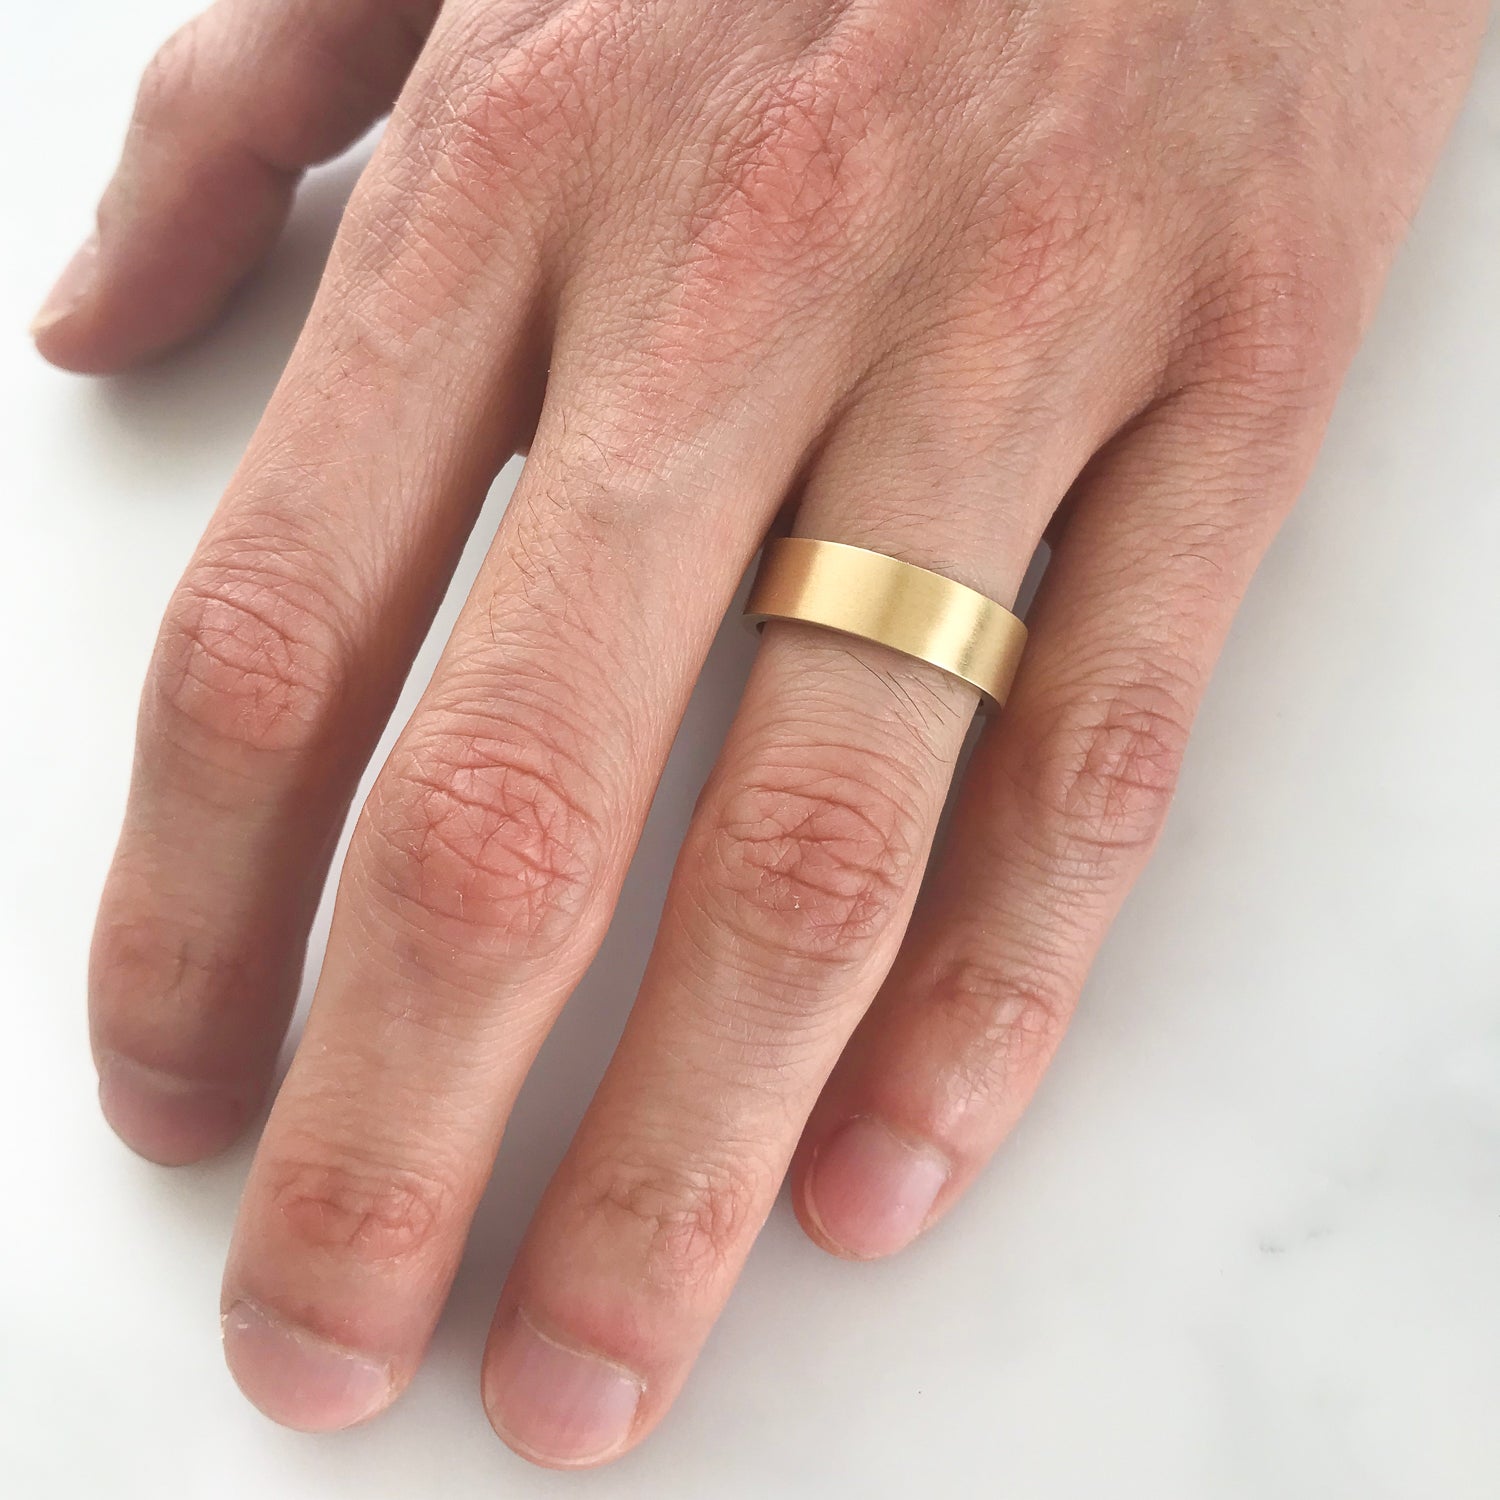 Buy 14K Yellow Gold Ring Band, Flat Style Women's Men's Wedding Ring Band,  Plain Simple Gold Band, Make Your Own Matching Gold Wedding Bands Set  Online in India - Etsy